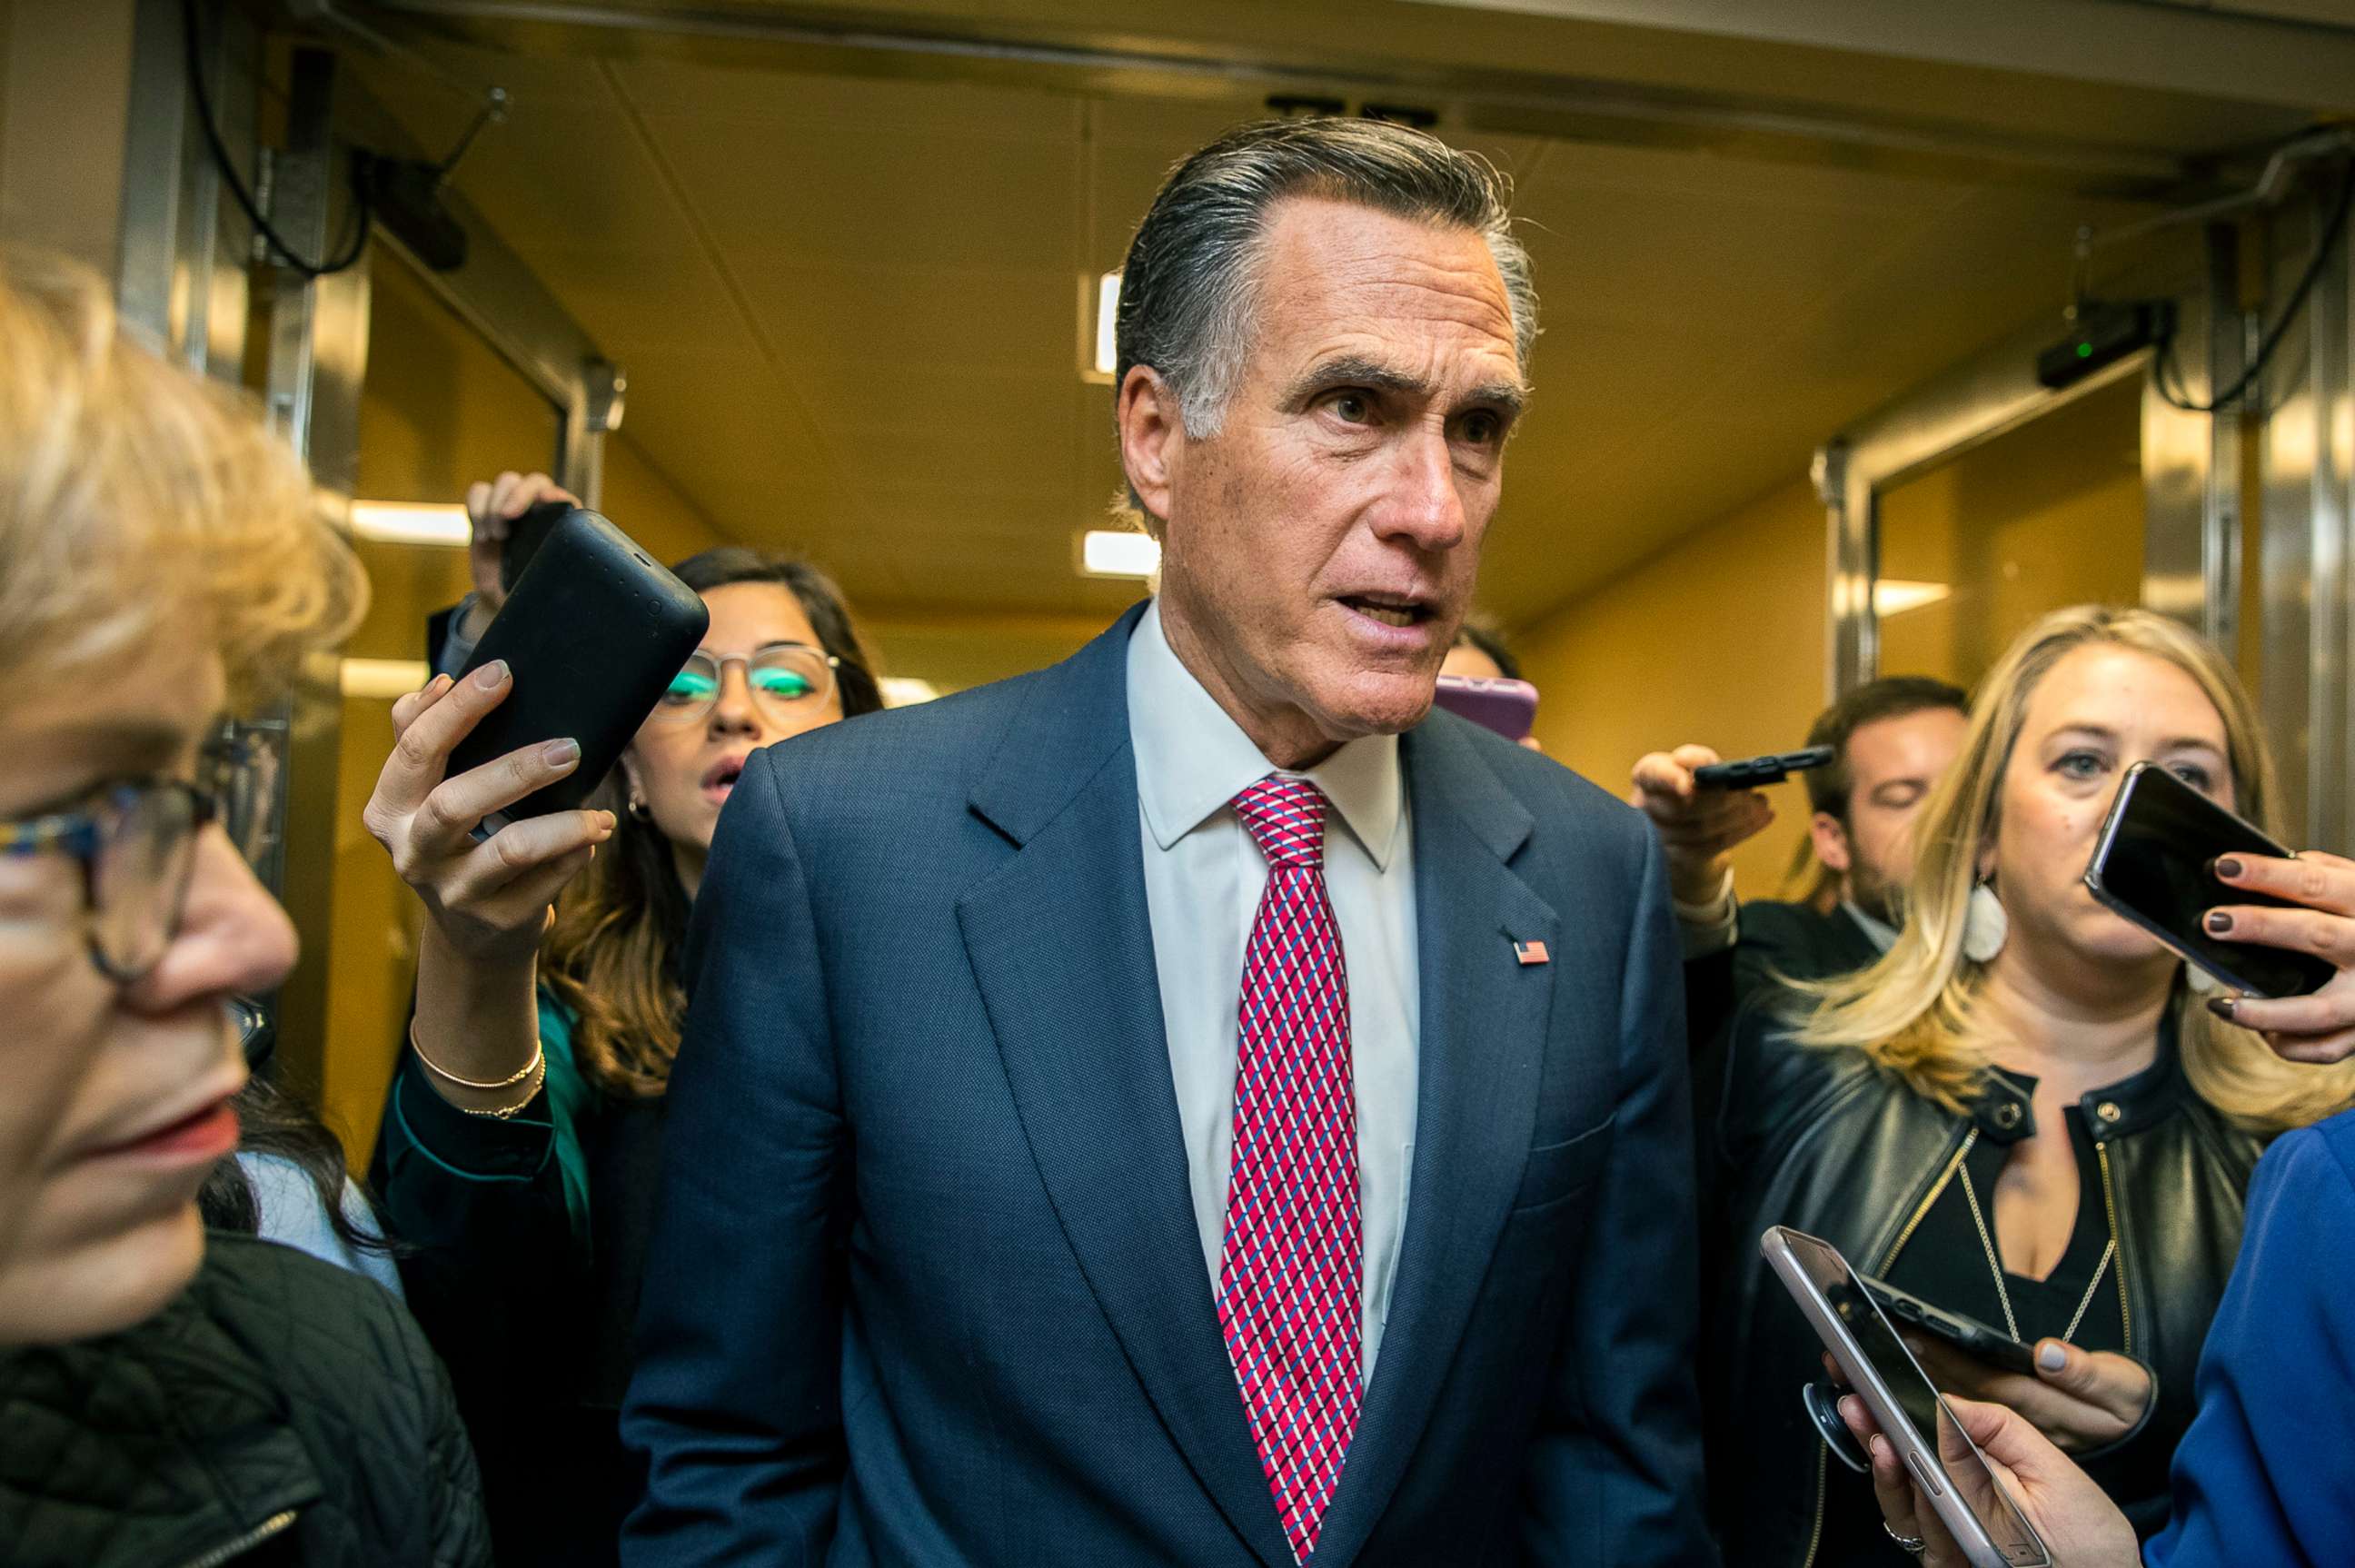 PHOTO: Sen. Mitt Romney speaks to reporters as he arrives at the Capitol, Jan. 27, 2020, during the impeachment trial of President Donald Trump.